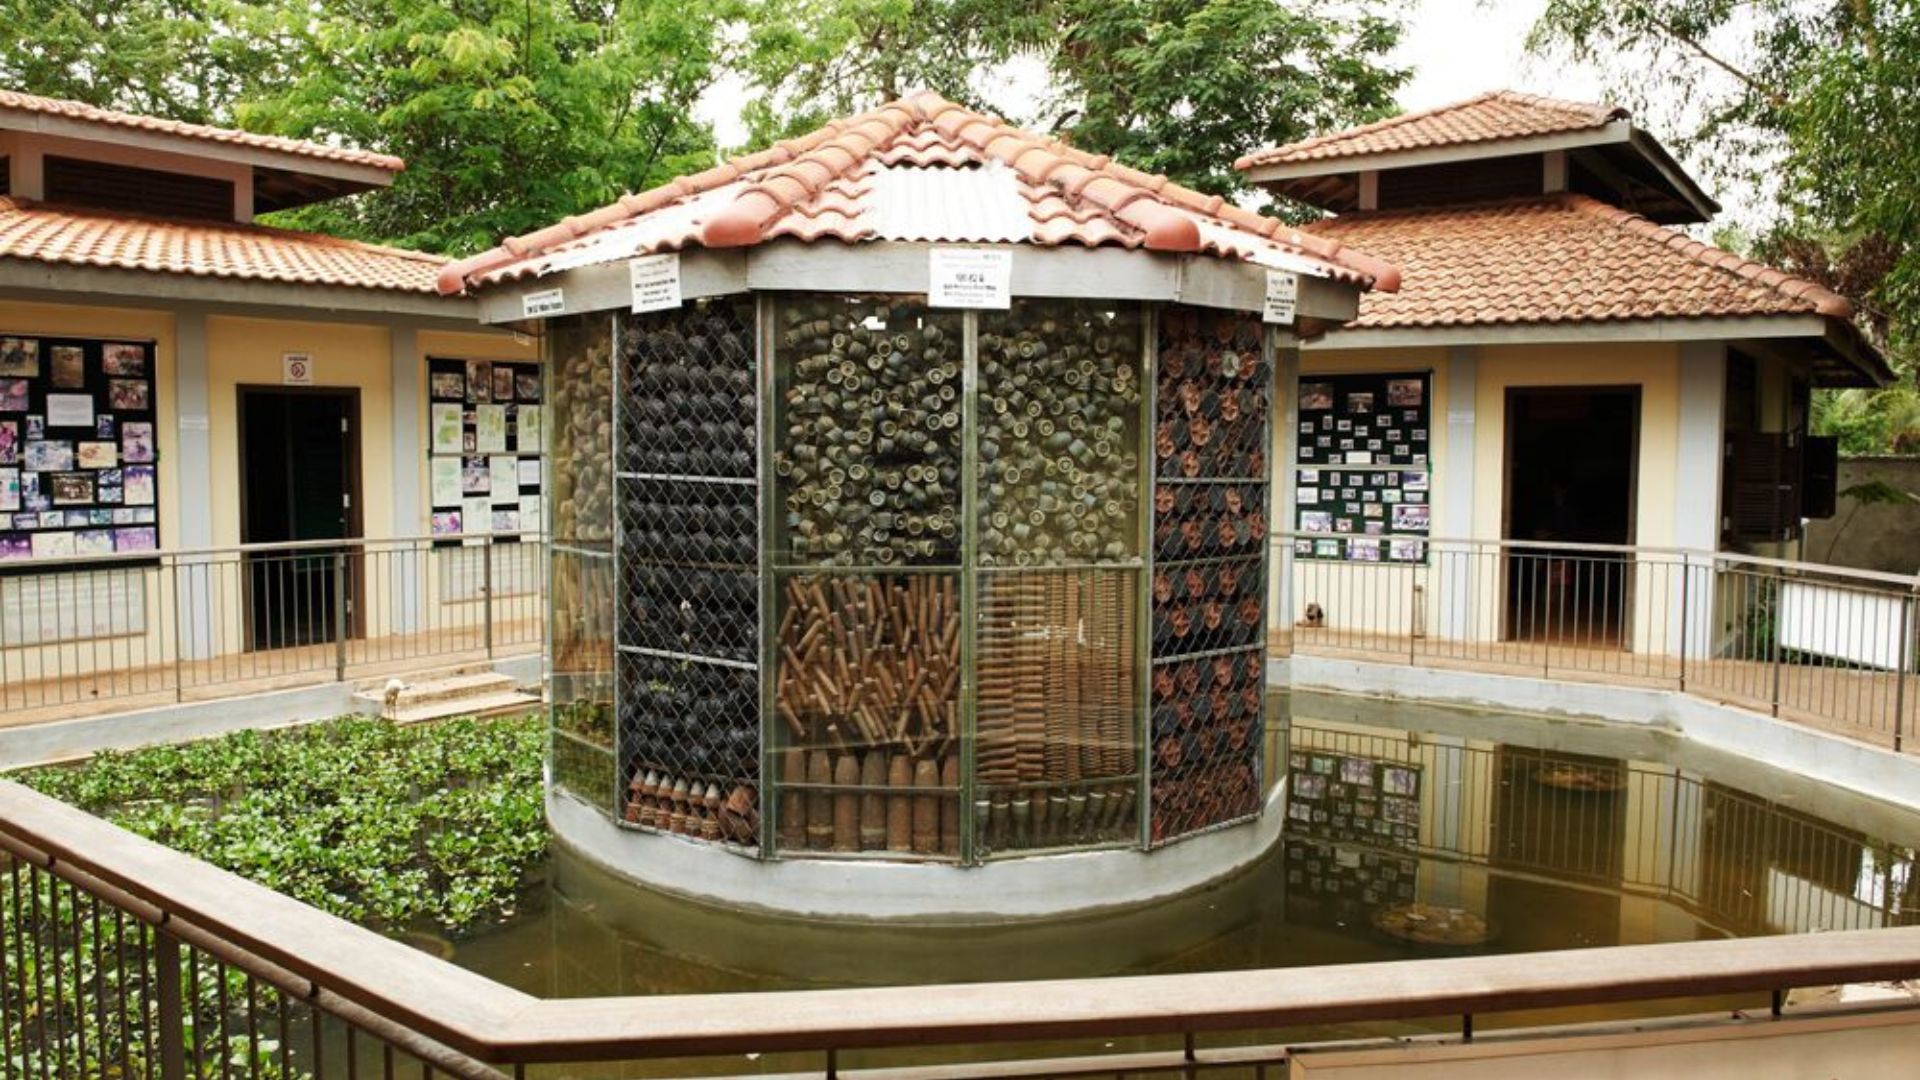 Cambodia Landmine Museum, one of the best places to visit in siem reap